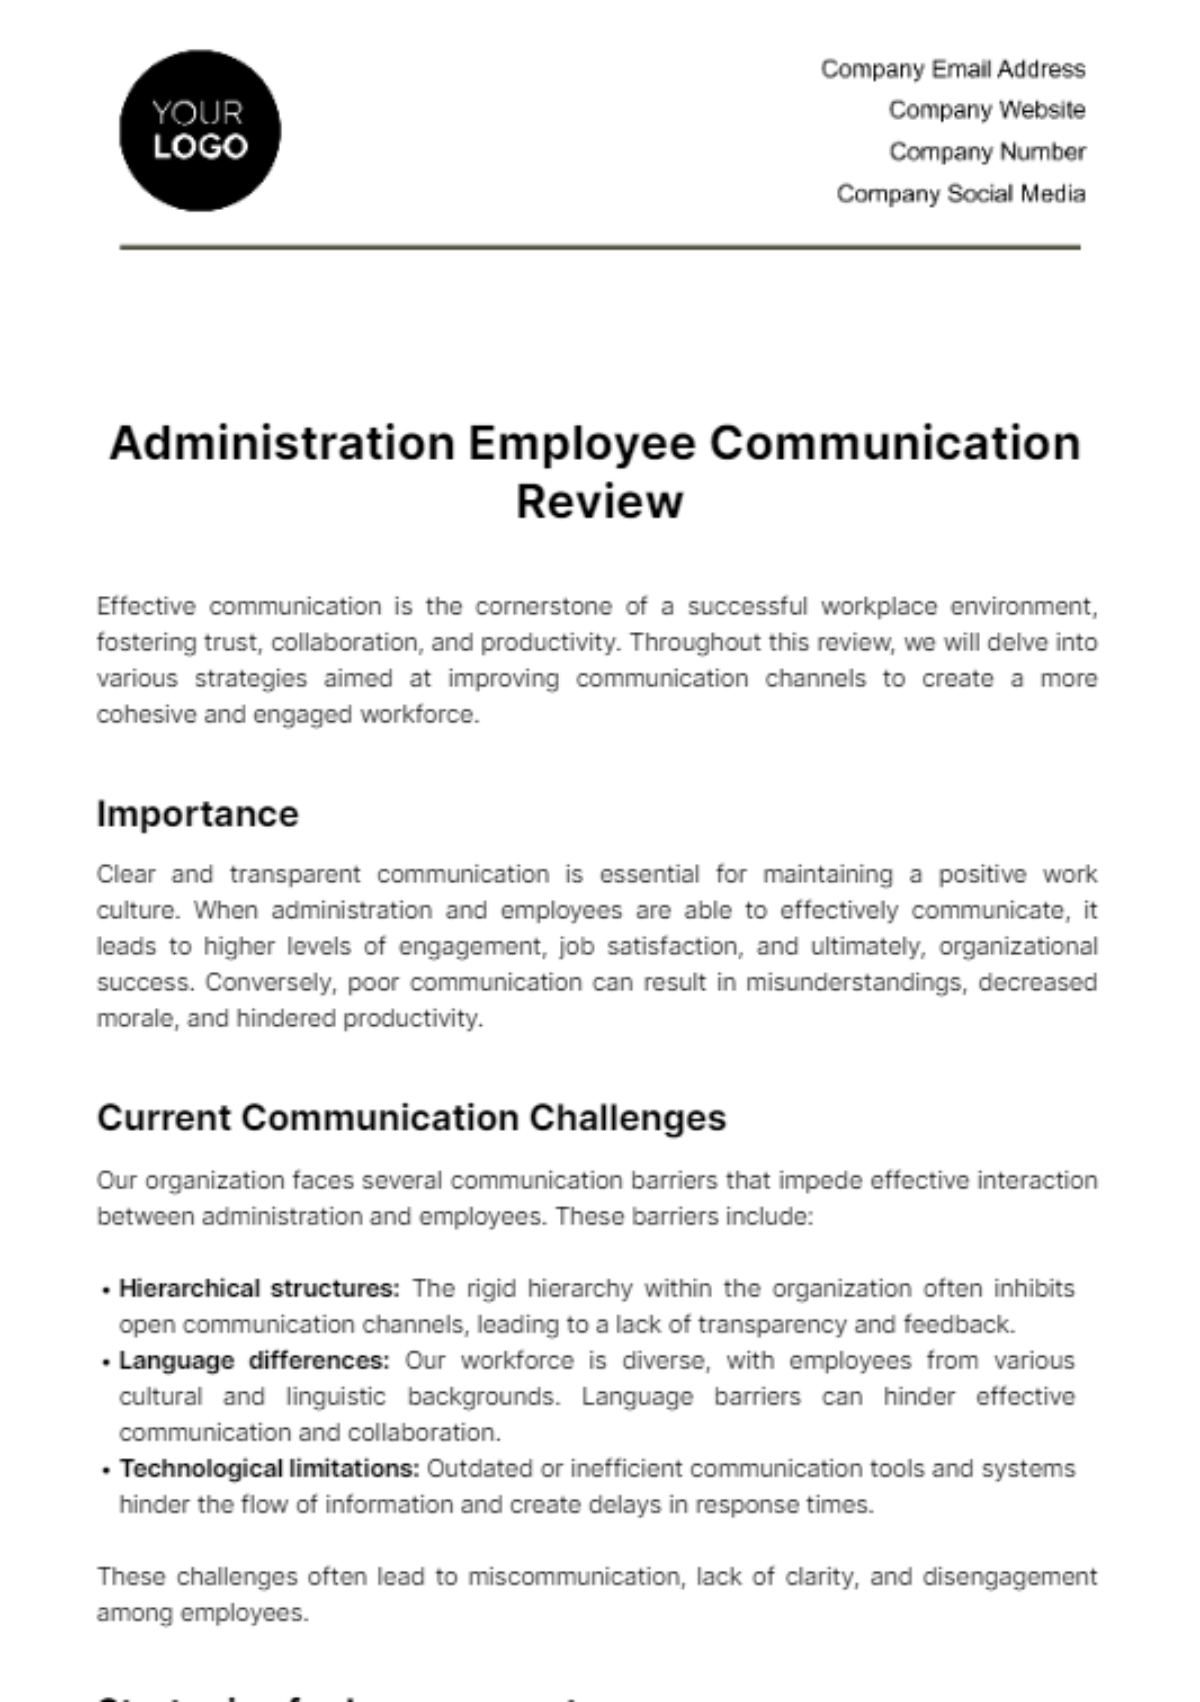 Administration Employee Communication Review Template